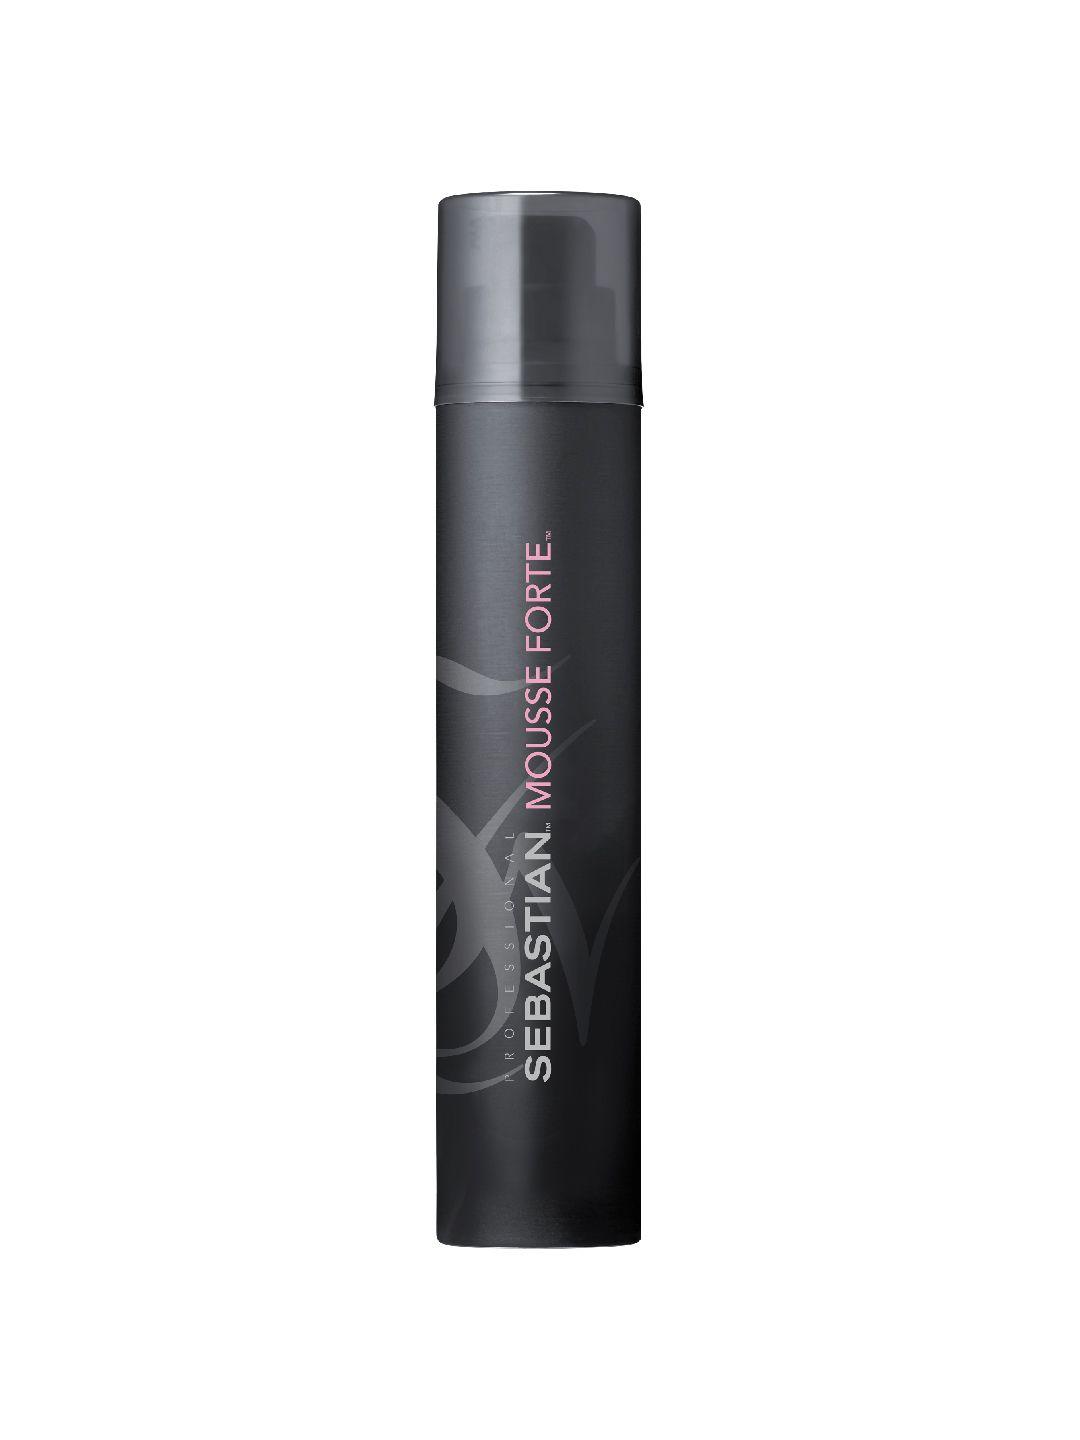 sebastian professional mousse forte strong-hold hair mousse - 200ml